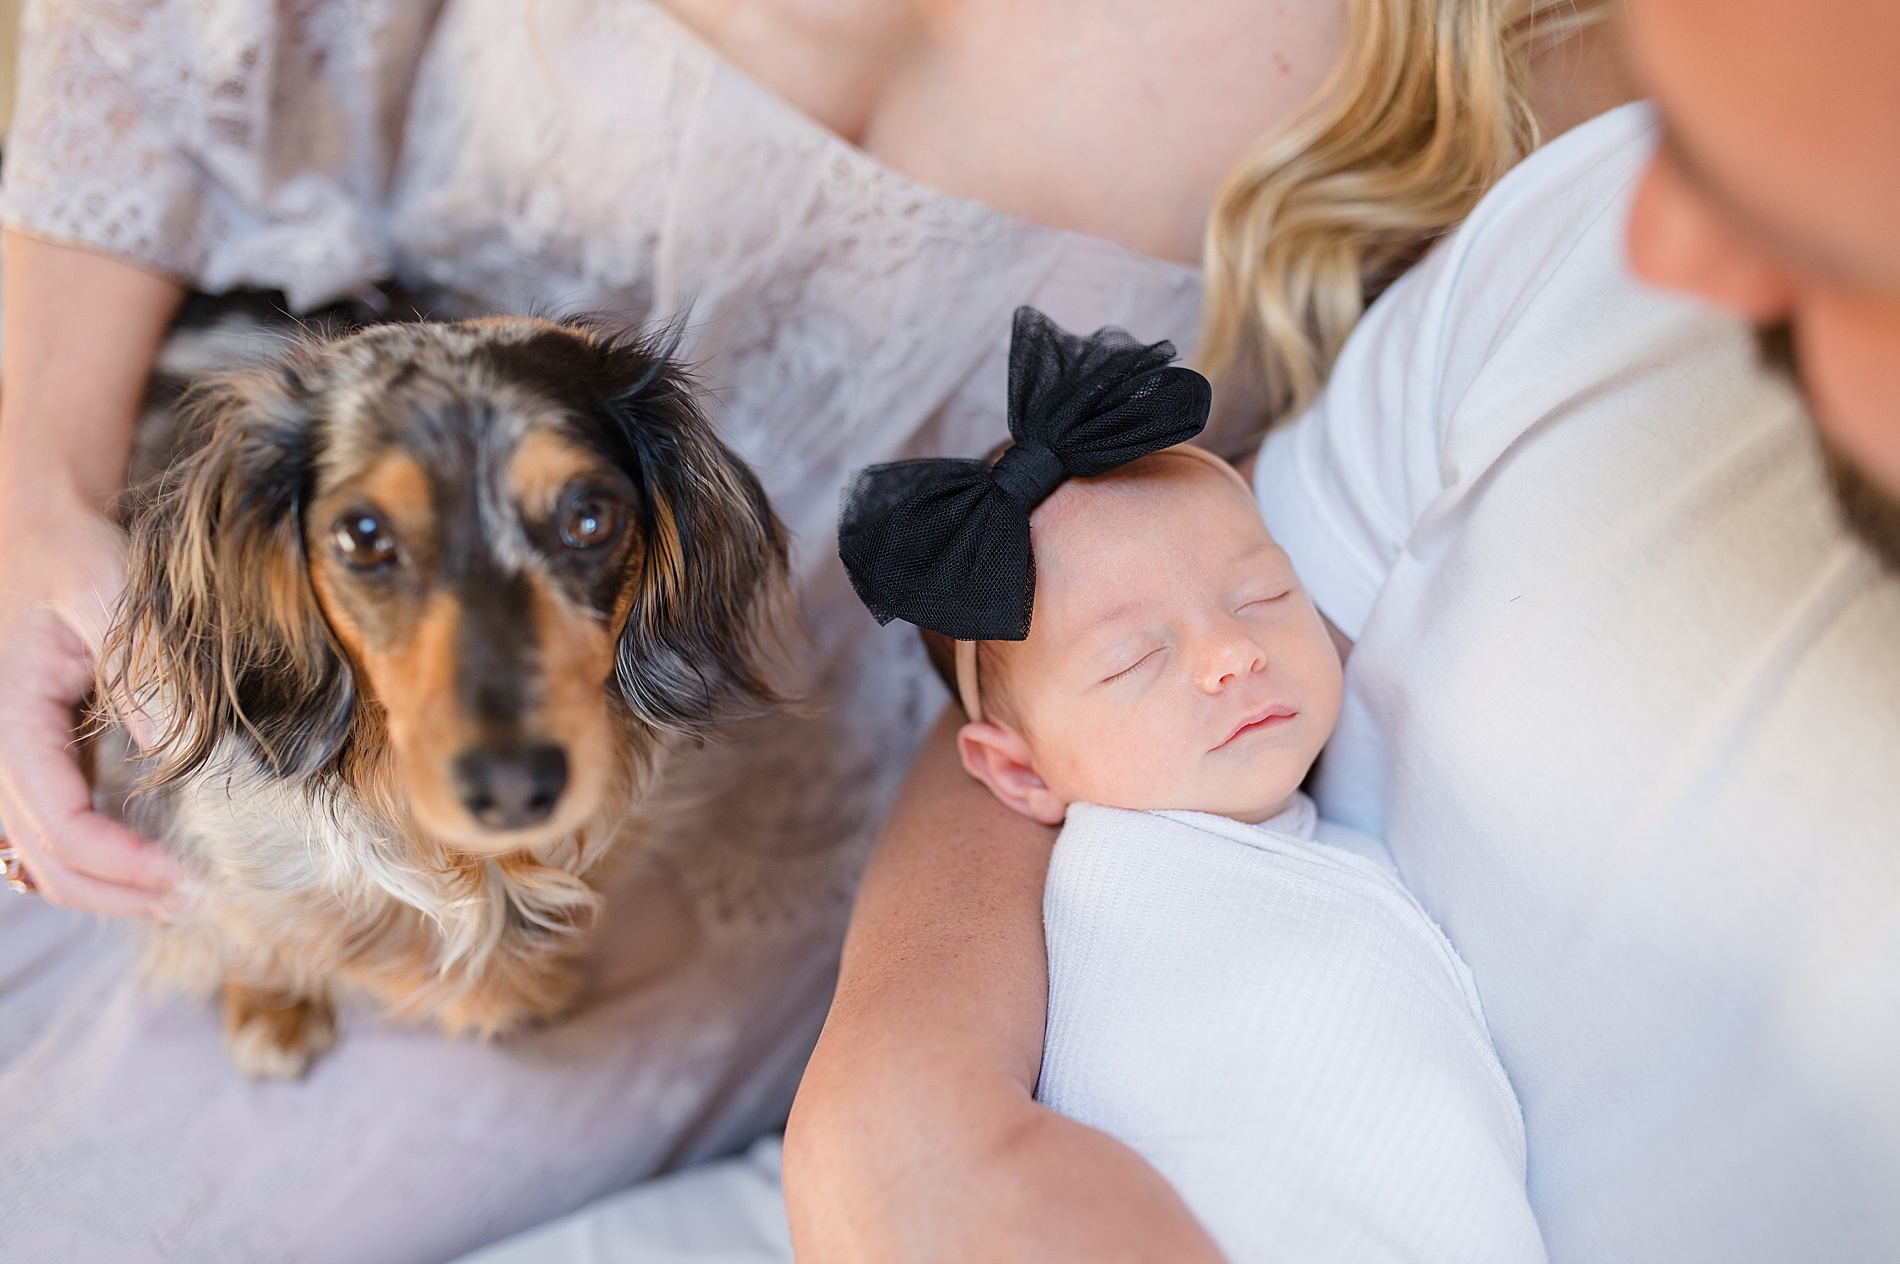 parents hold newborn with dogs nearby photographed by Lindsey Dutton Photography, a Dallas Newborn photographer